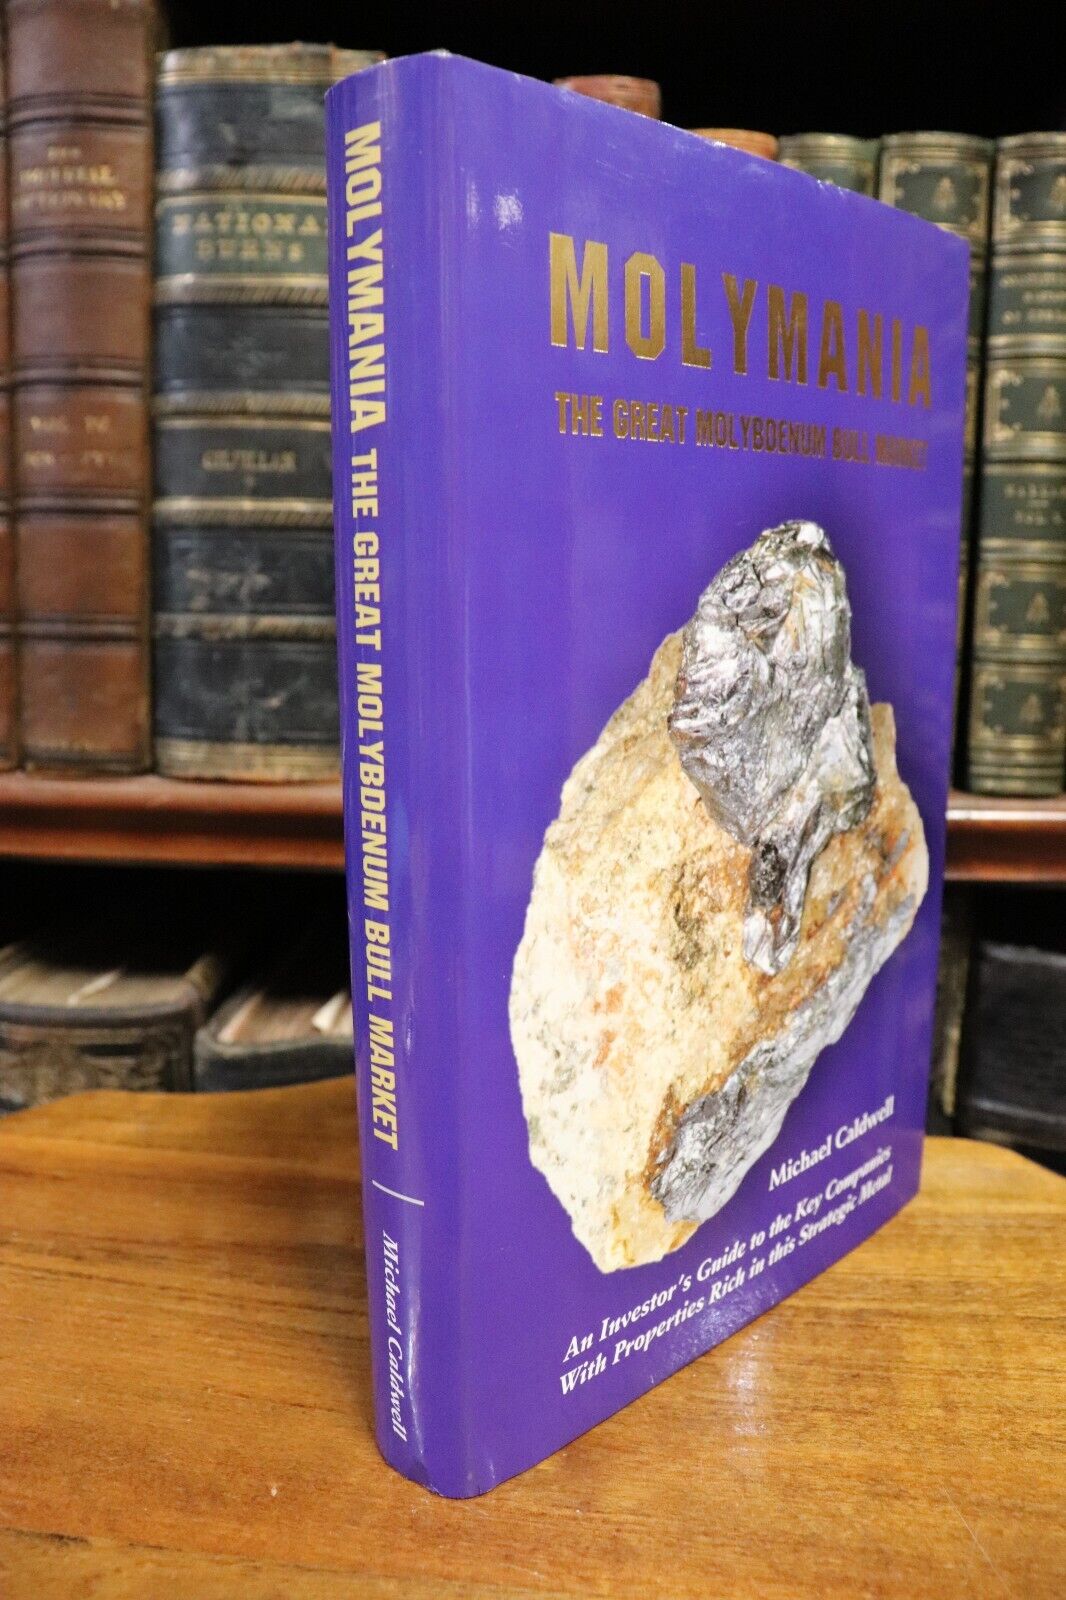 The Great Molybdenum Bull Market - 2008 - Mining Investment Reference Book